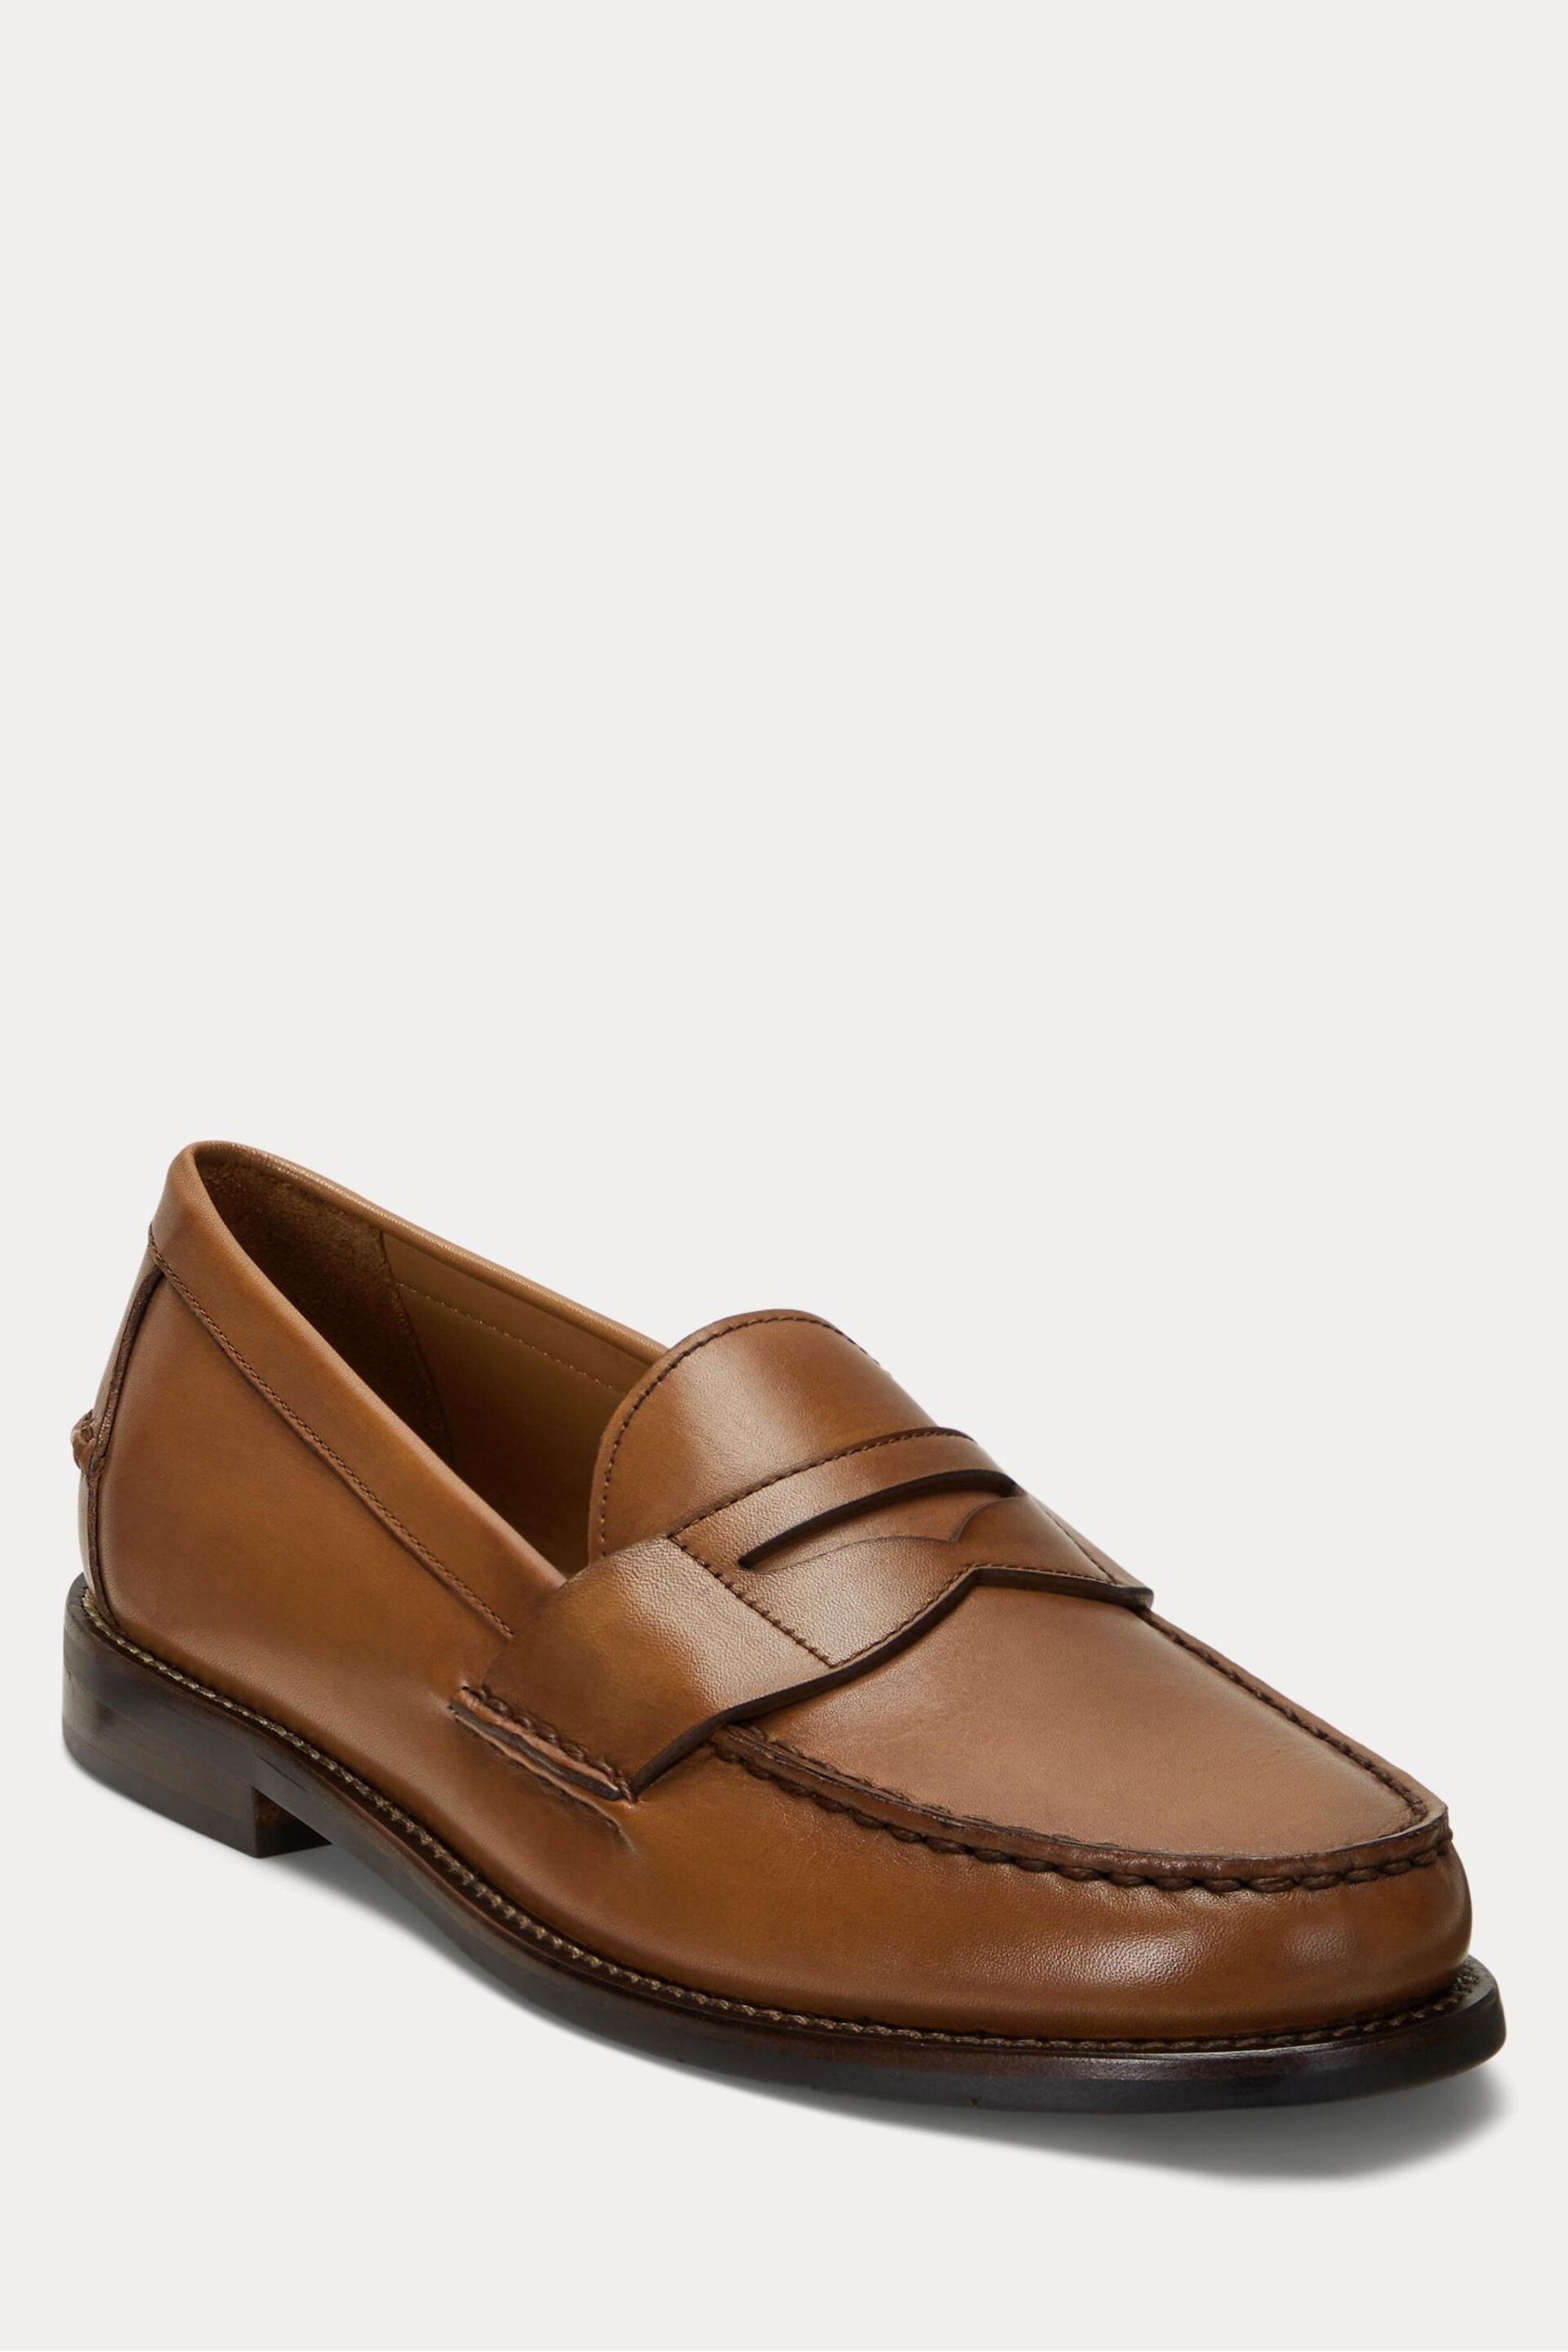 Polo Ralph Lauren Leather Alston Pony Loafers - Image 2 of 4